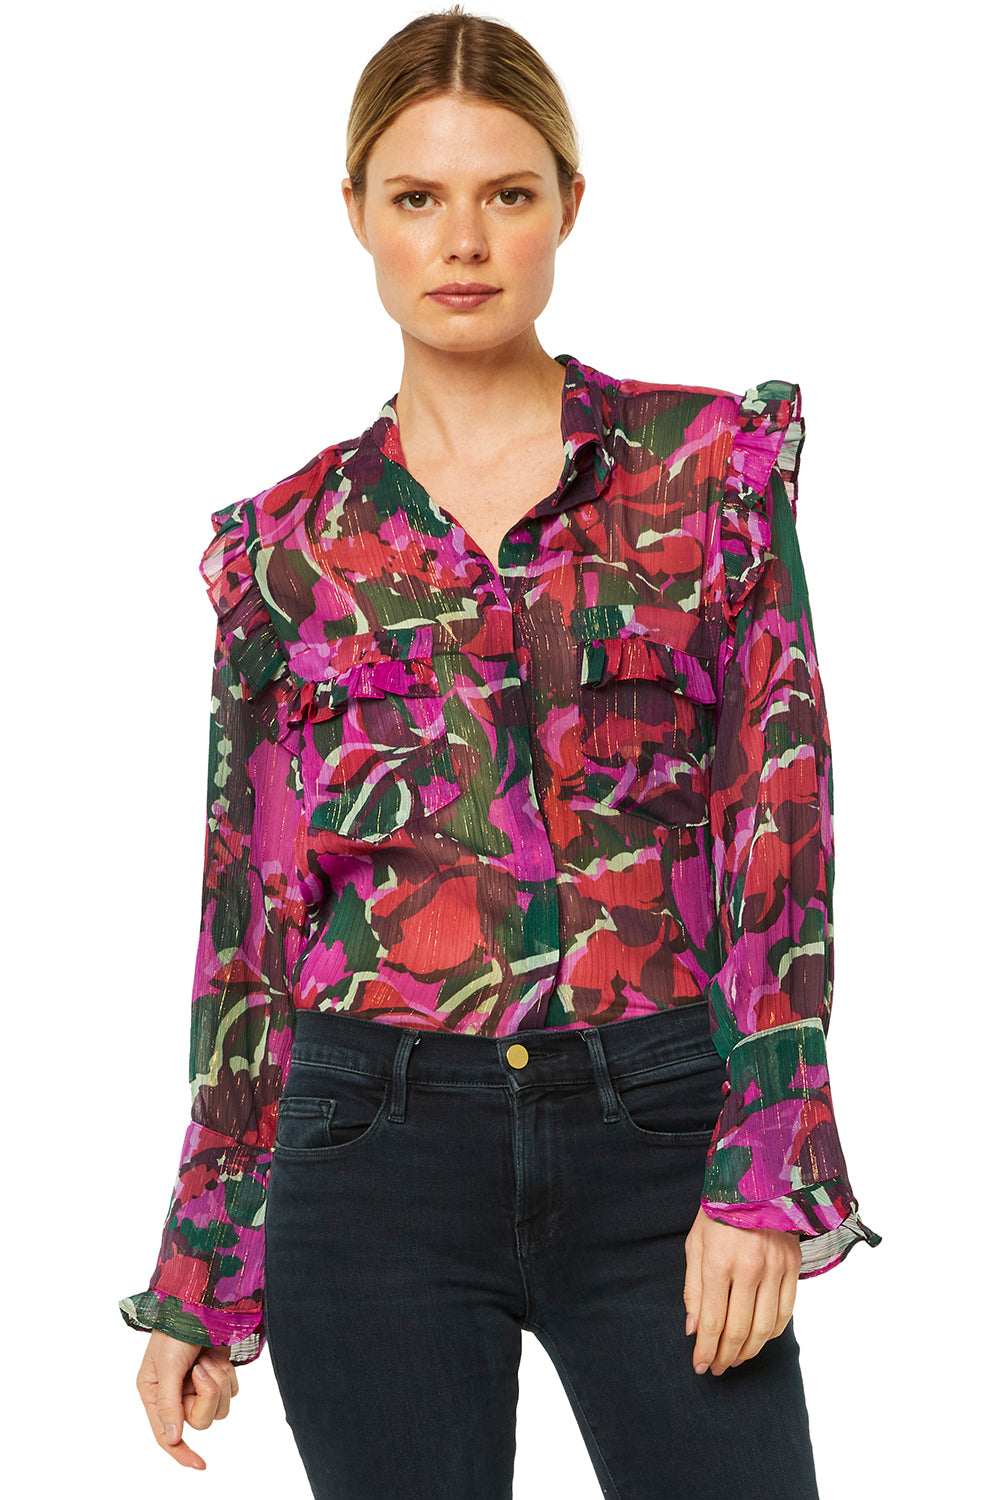 Misa - Anita Top in Holiday Sparkle Abstract